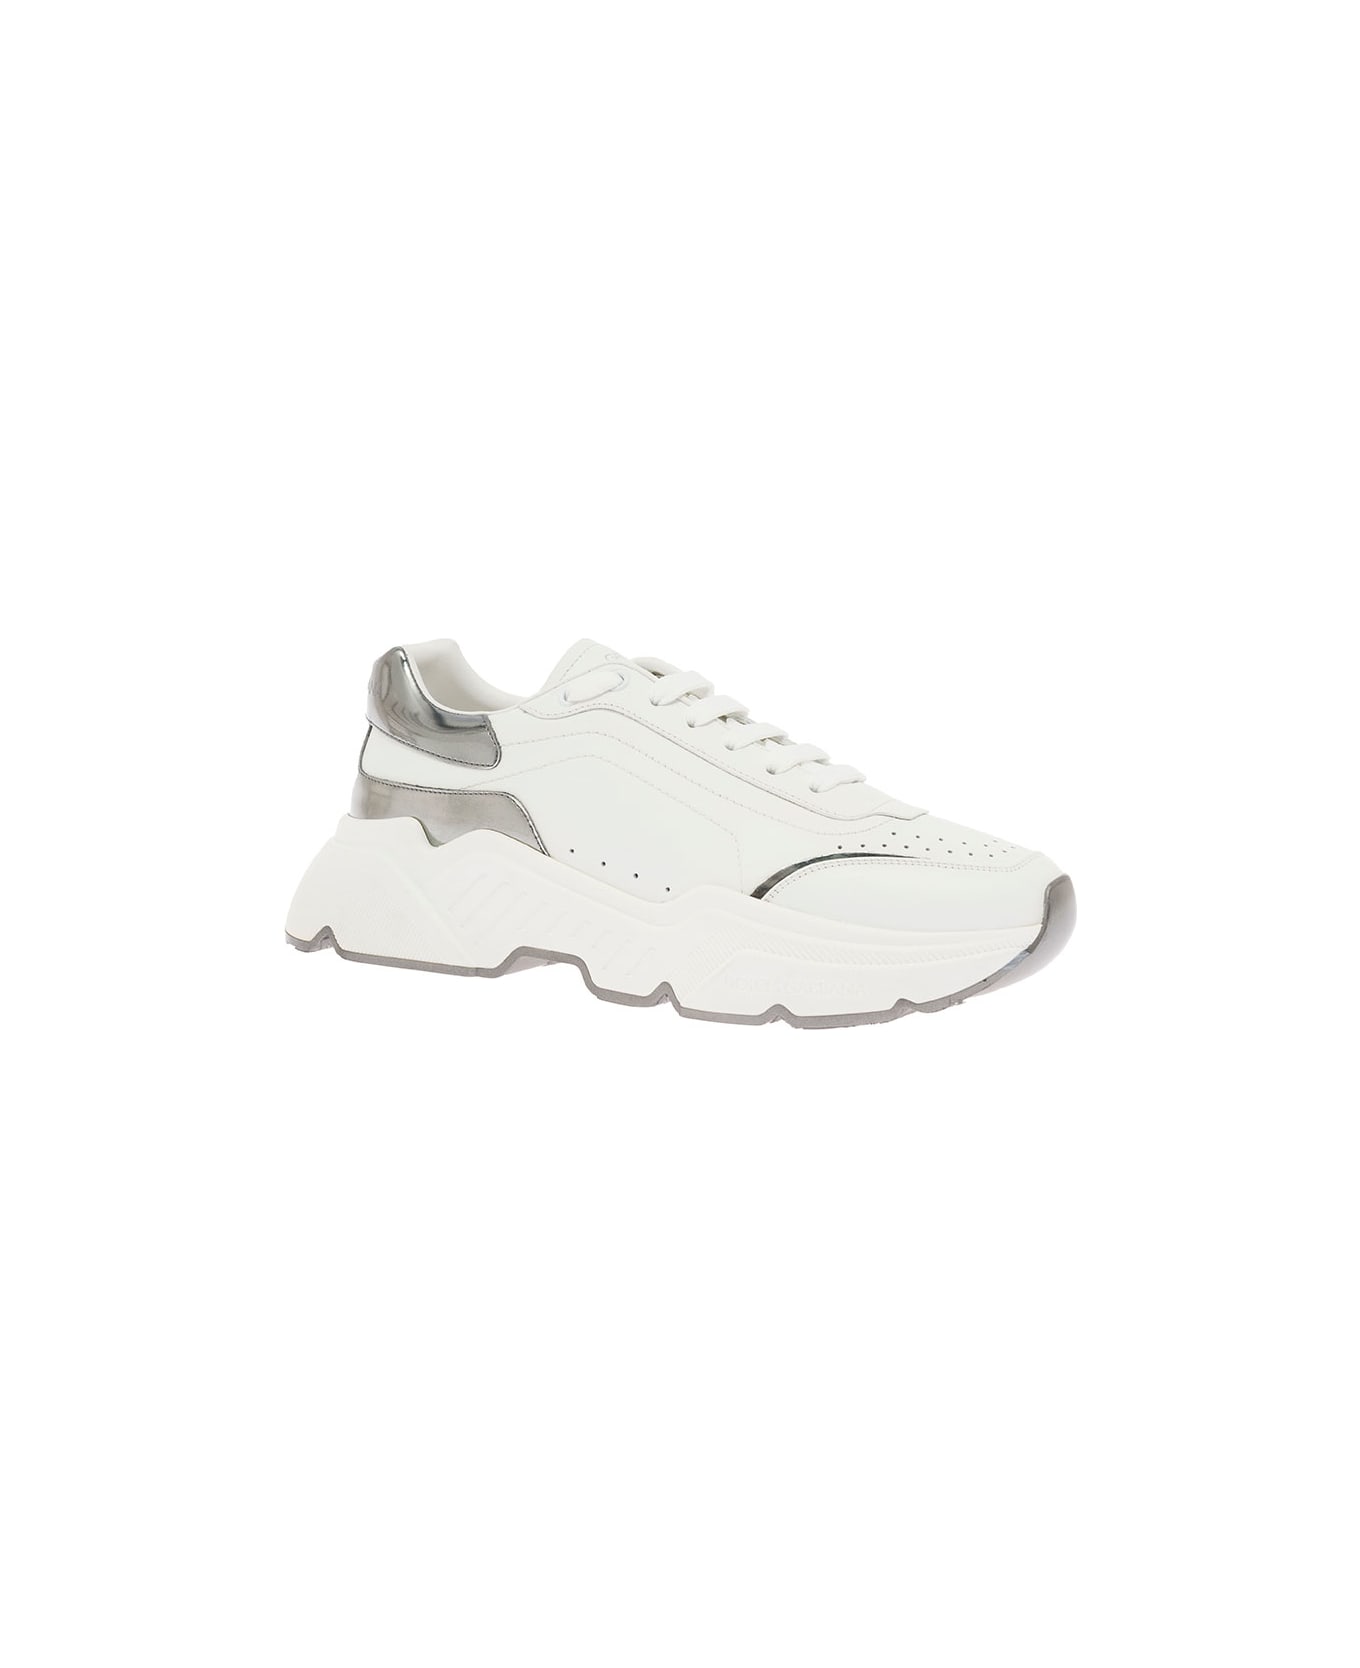 Dolce & Gabbana Man's Daymaster  White And Silver Leather  Sneakers - White